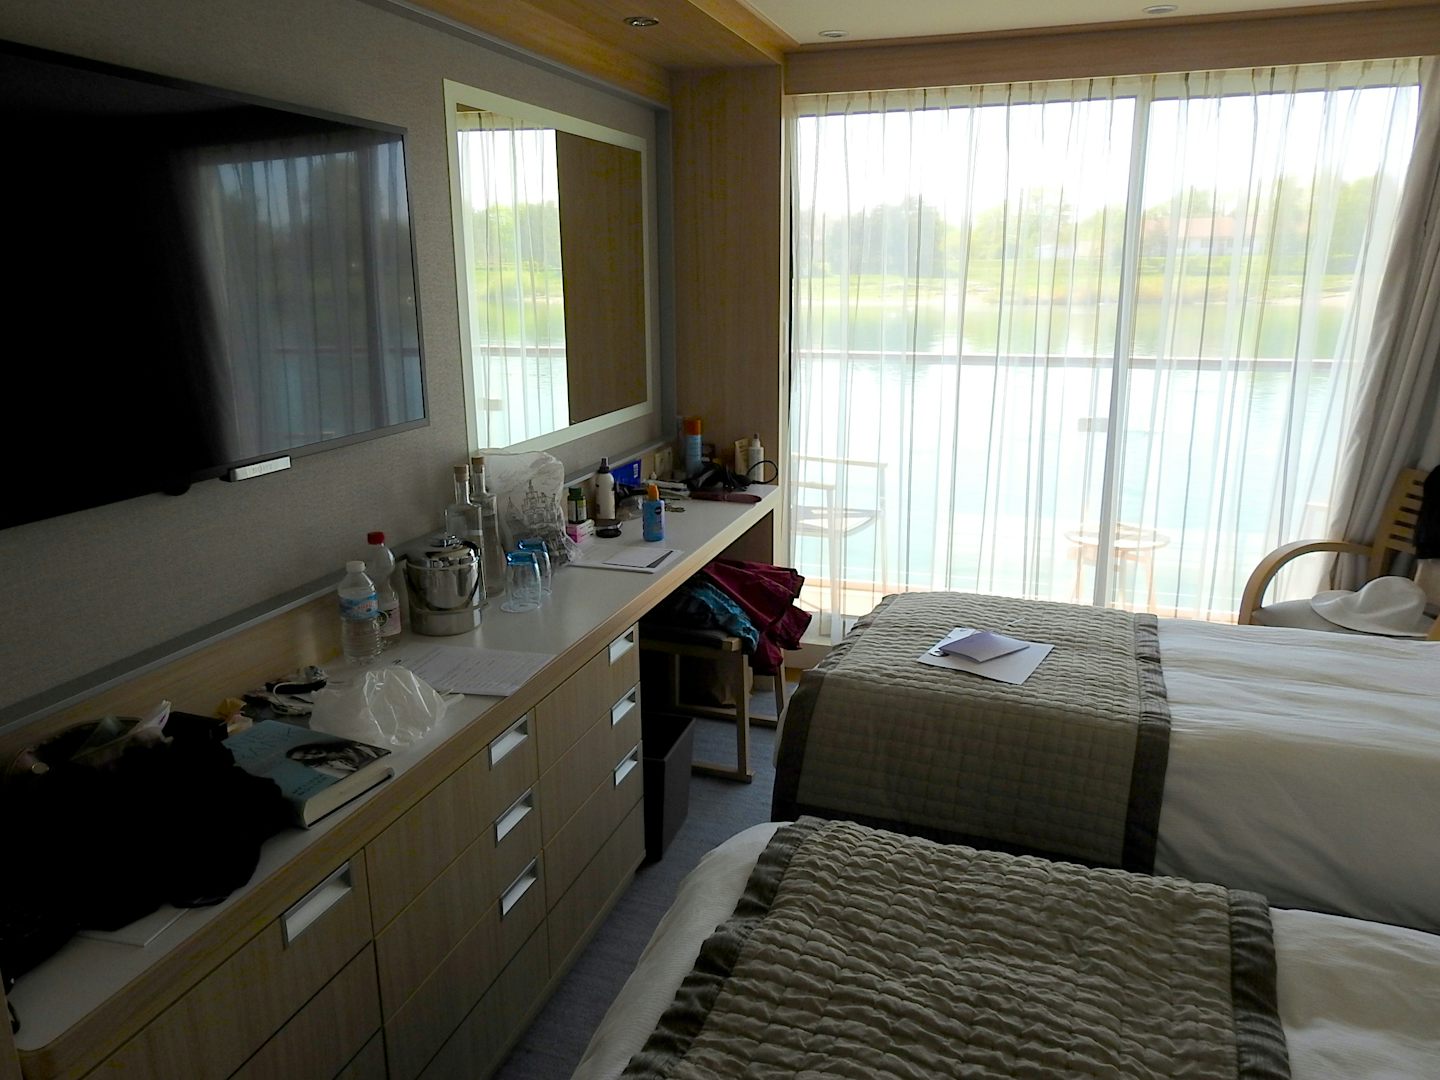 Our lovely cabin with balcony